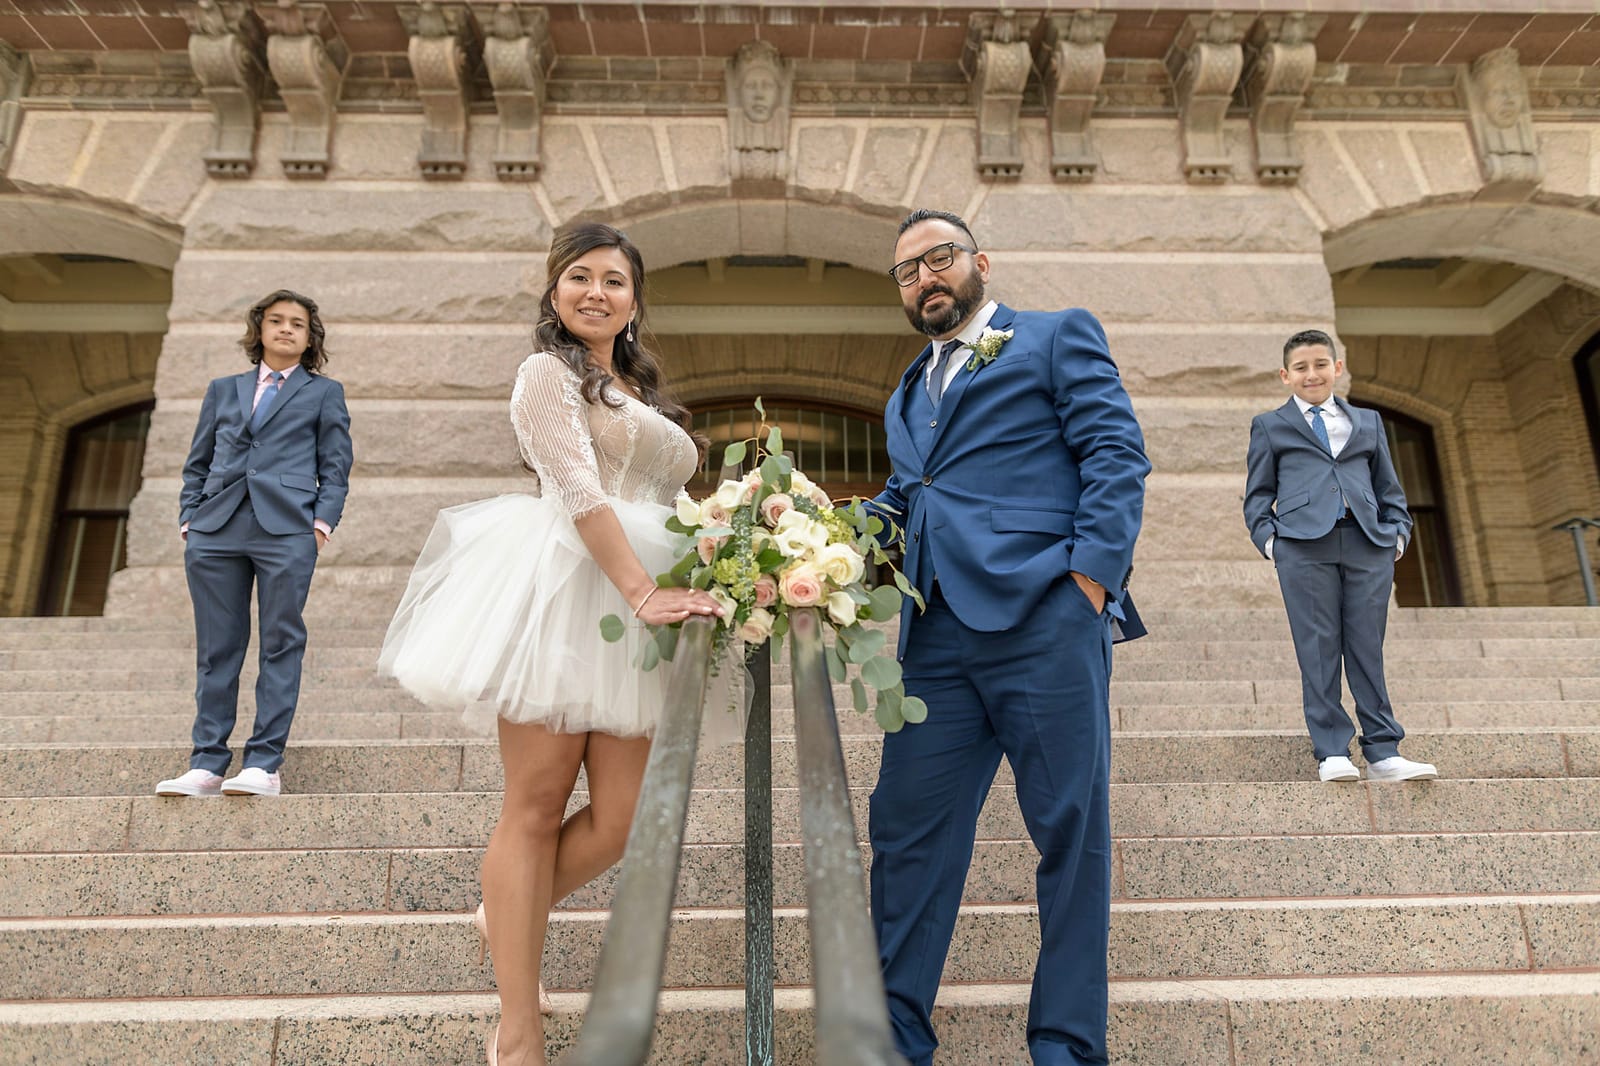 Houston Texas justice of the peace courthouse wedding, steps, kids posing